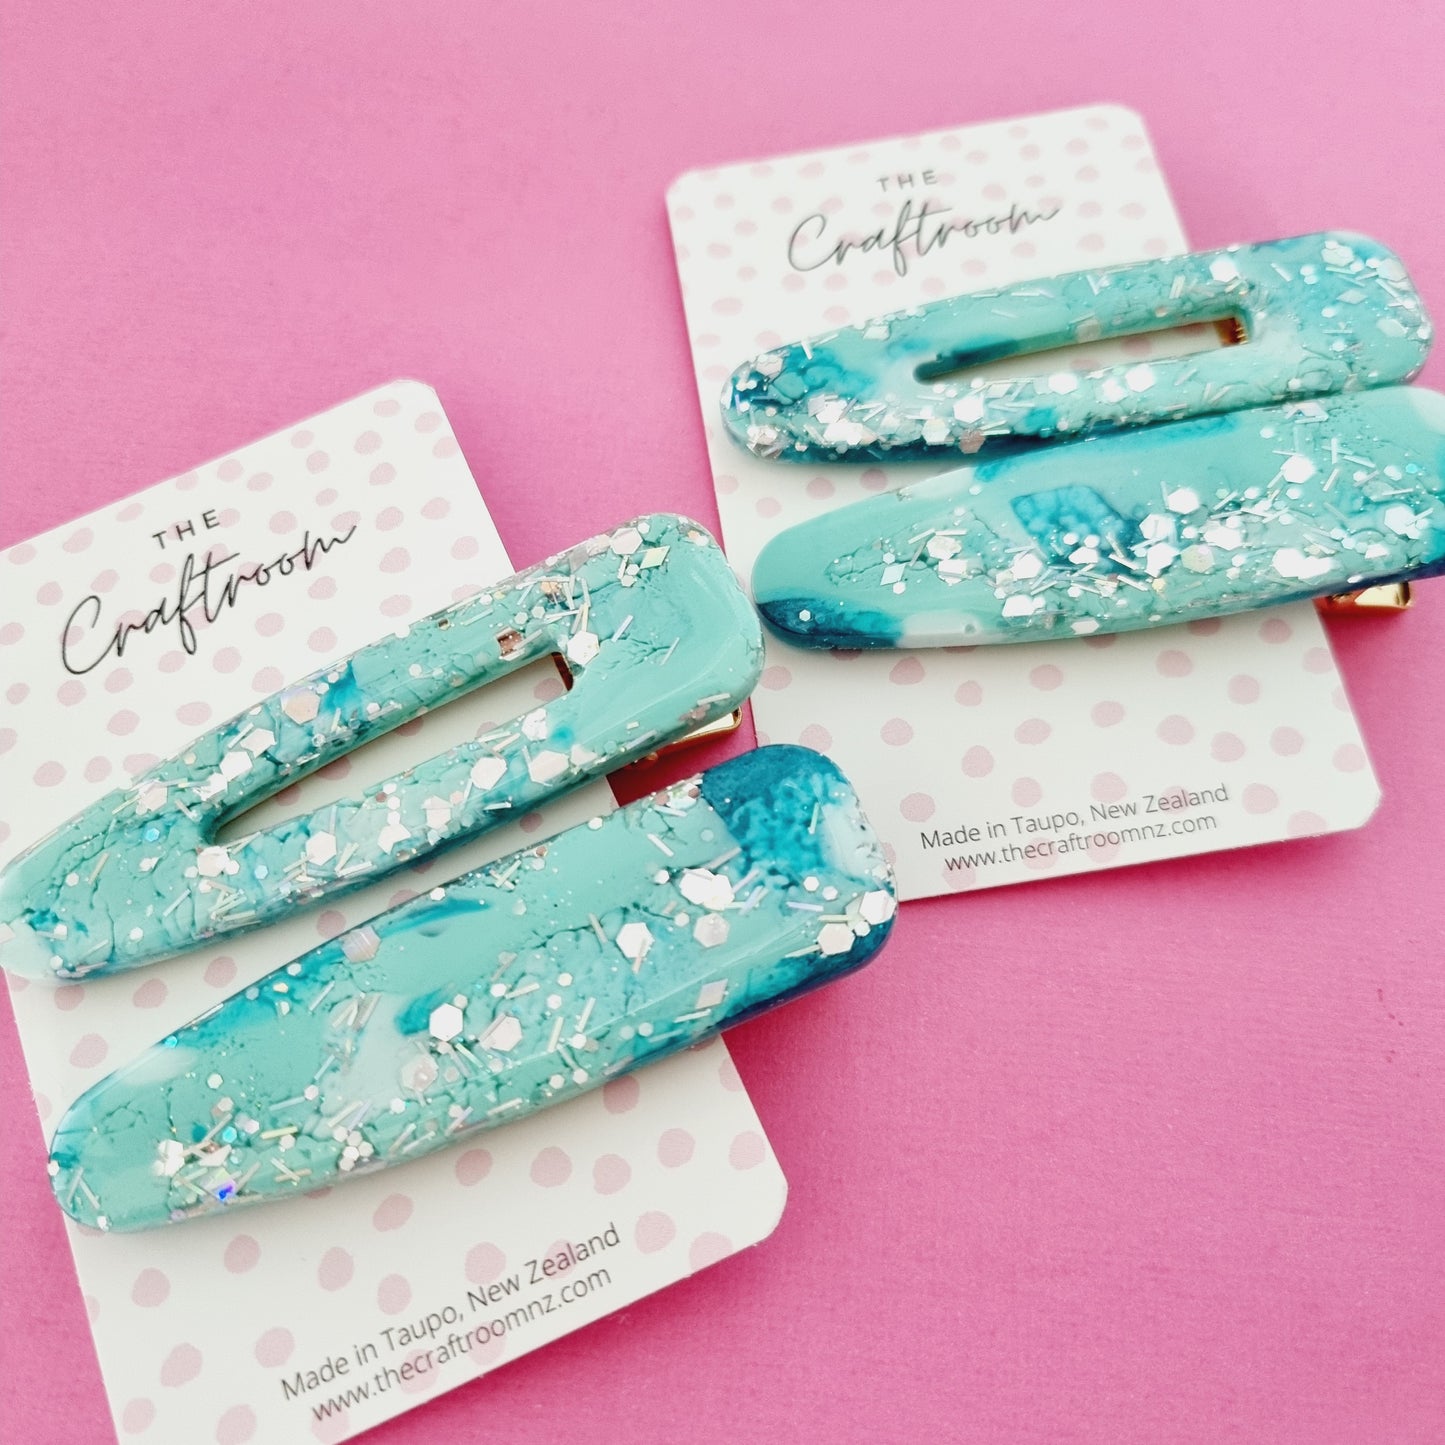 Resin hair clips 2 pack (large)